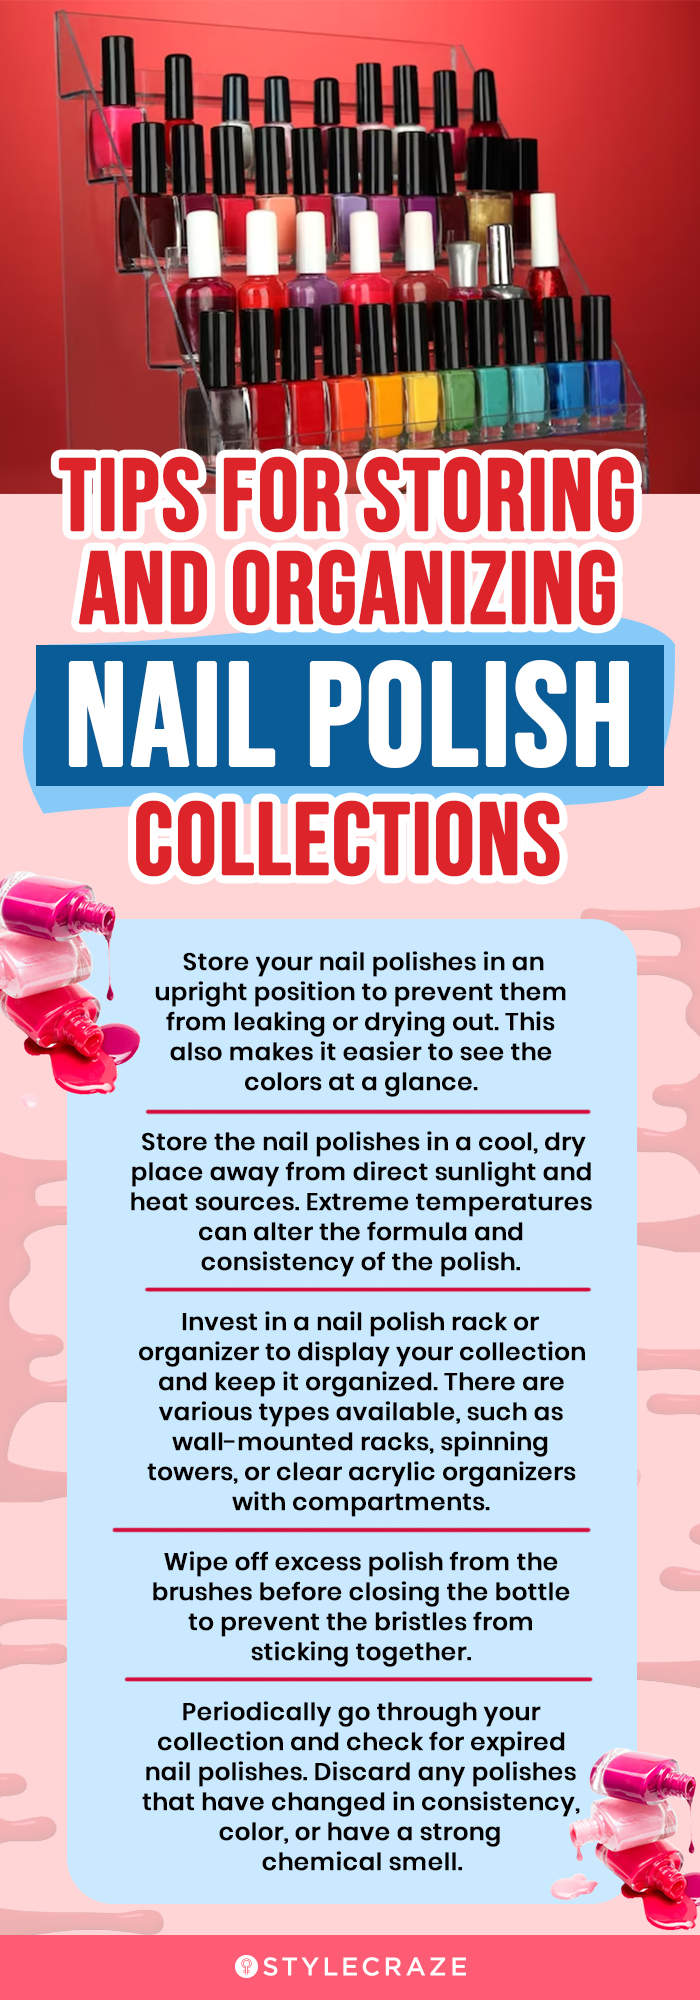 Tips For Storing And Organizing Nail Polish Collections (infographic)